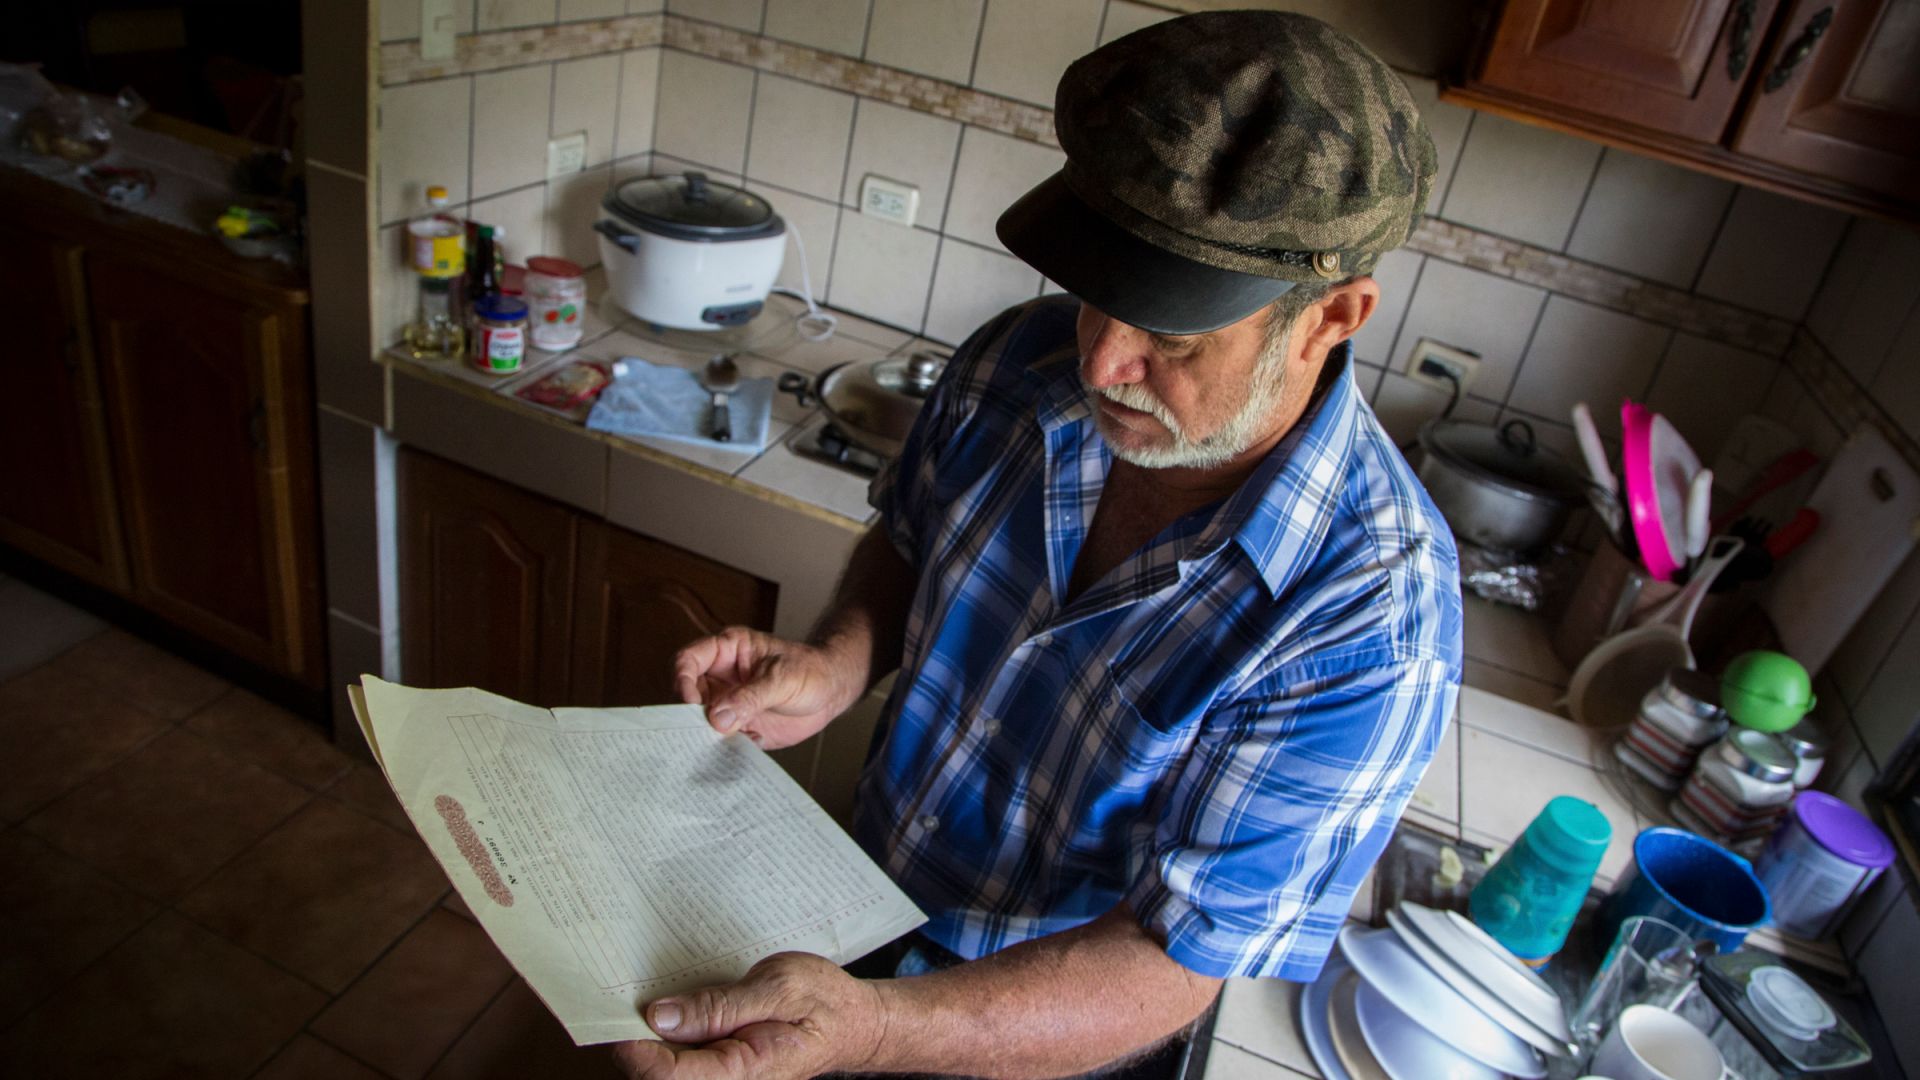 A photo of William Vega, 60, in his kitchen, holding the deed to the 100-hectare (247-acre) farm.